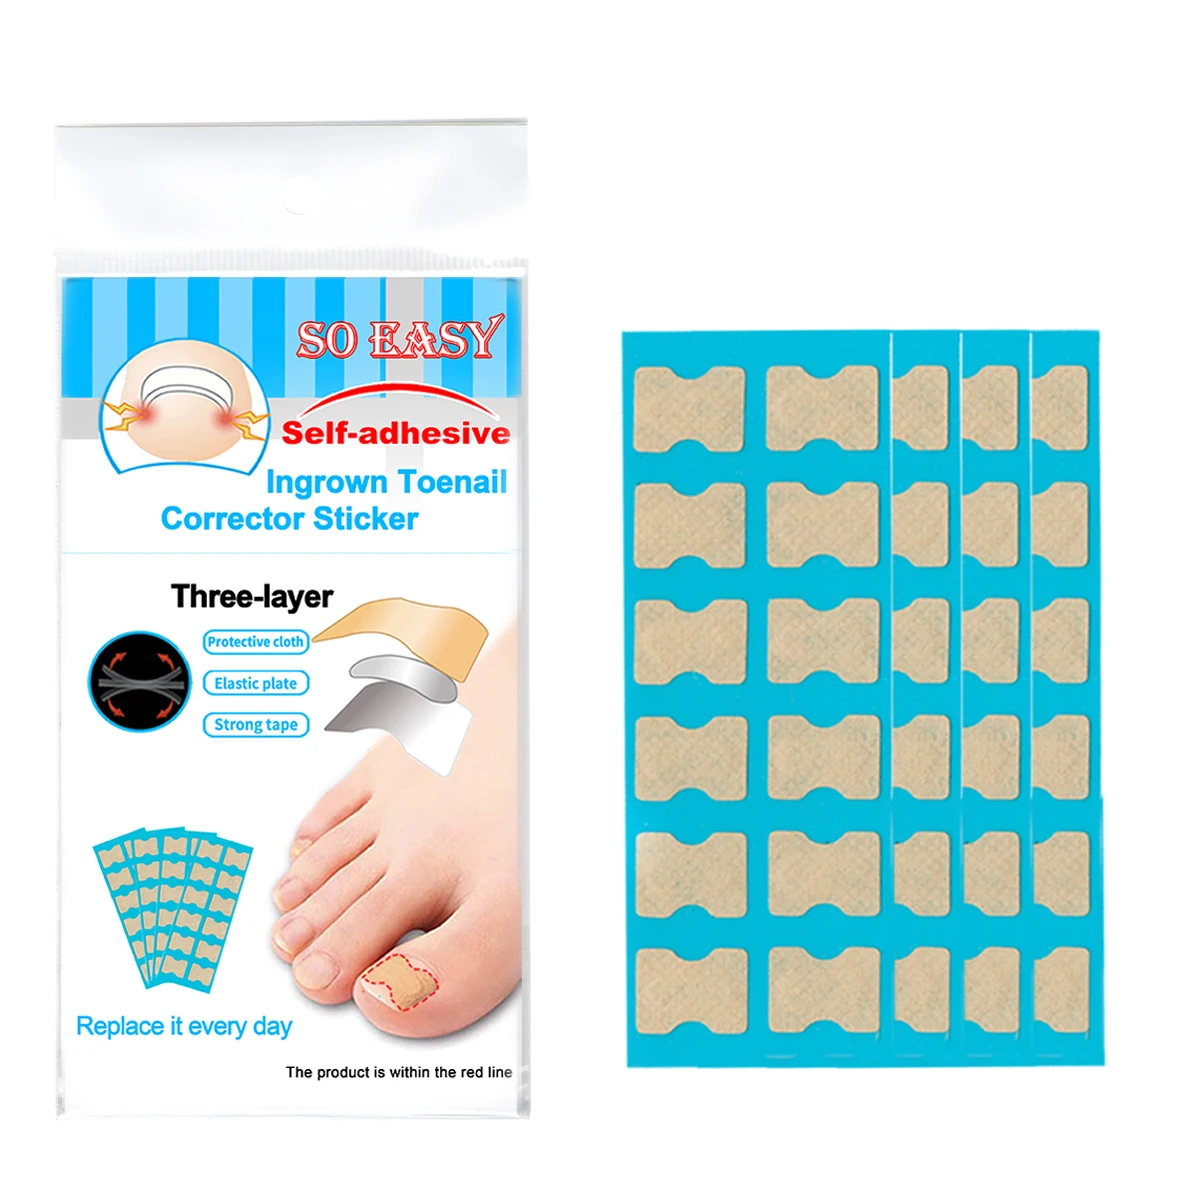 

Ingrown Toenail Correction Stickers for paronychia and toe pain relief and foot care tools